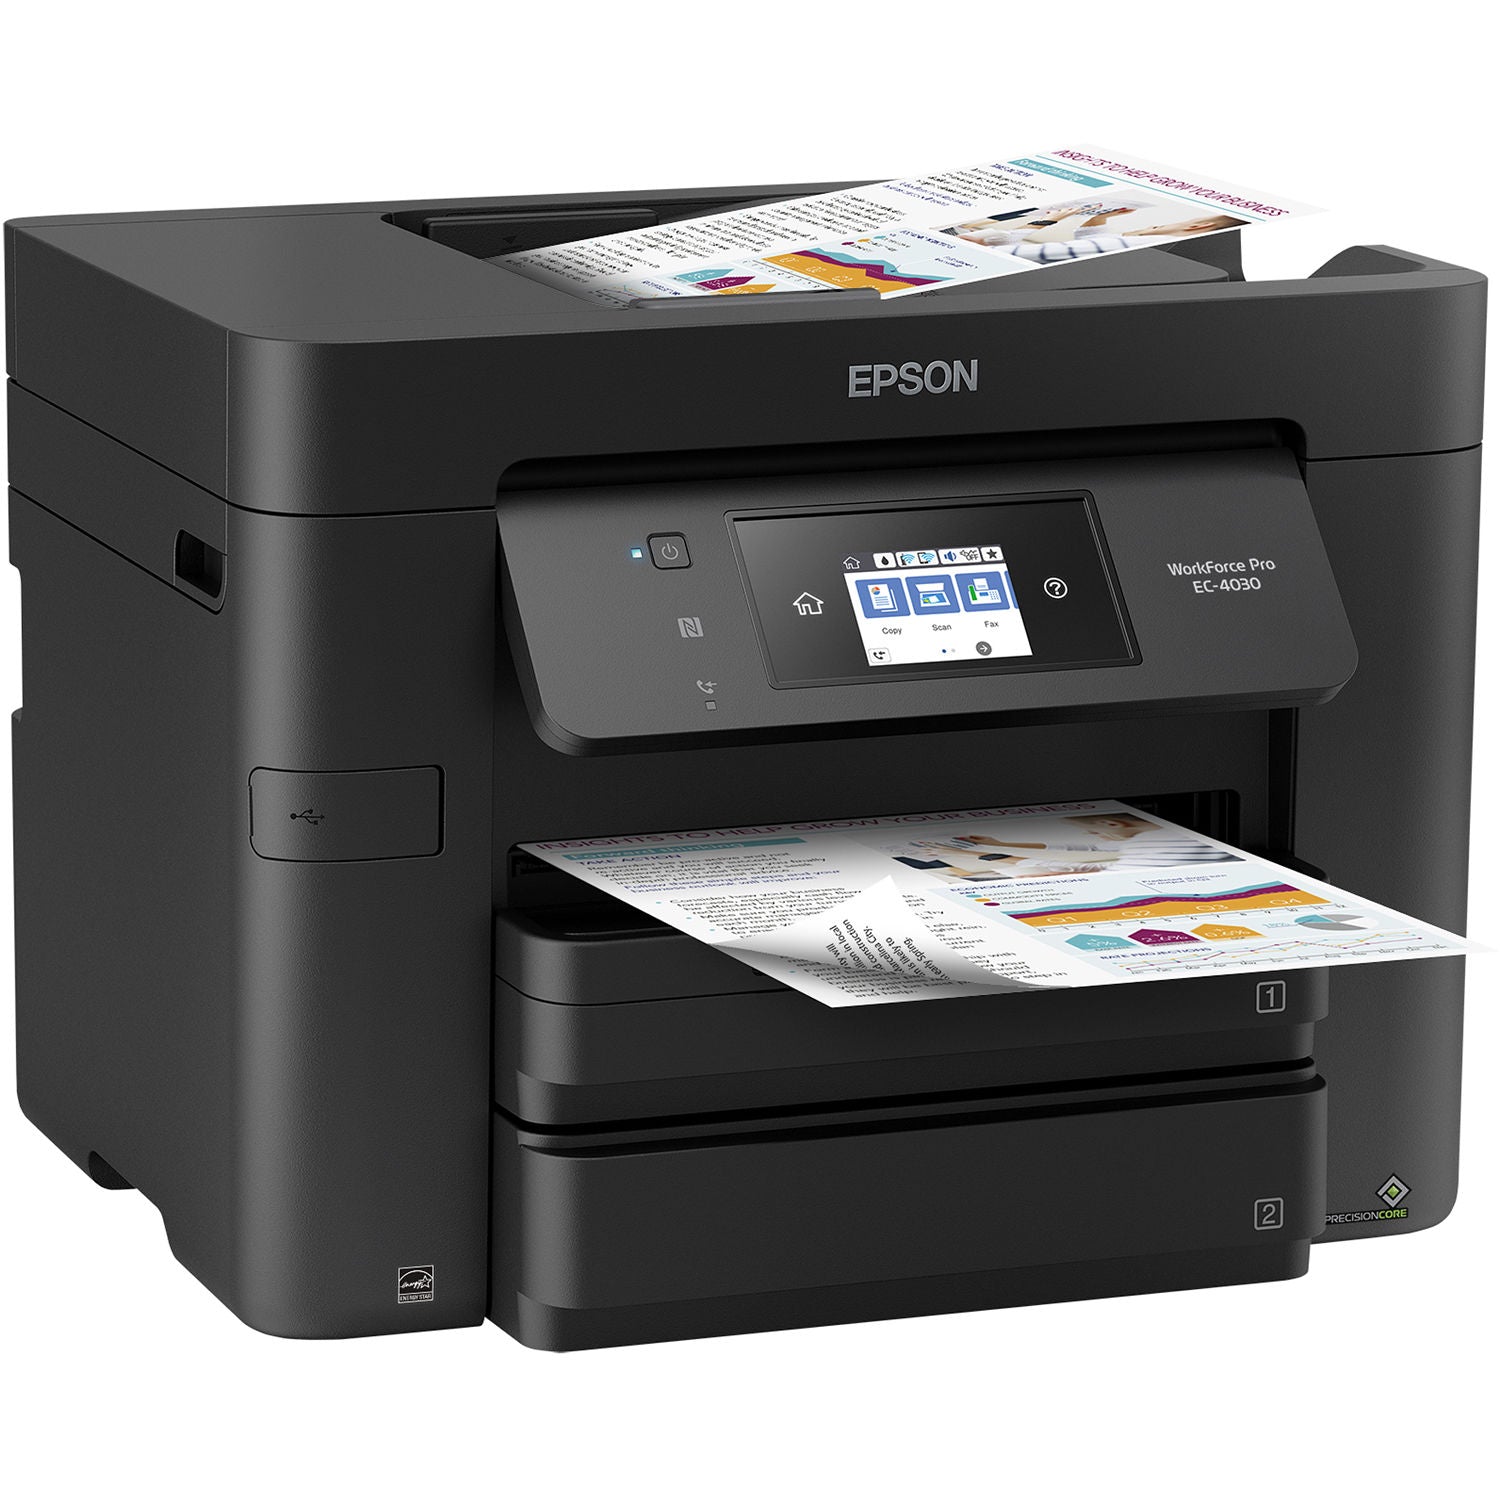 Absolute Toner New Epson Workforce Pro EC-4030 High-Speed Wireless Color Inkjet Multifunction Printer With Automatic Duplex Printing Showroom Color Copier